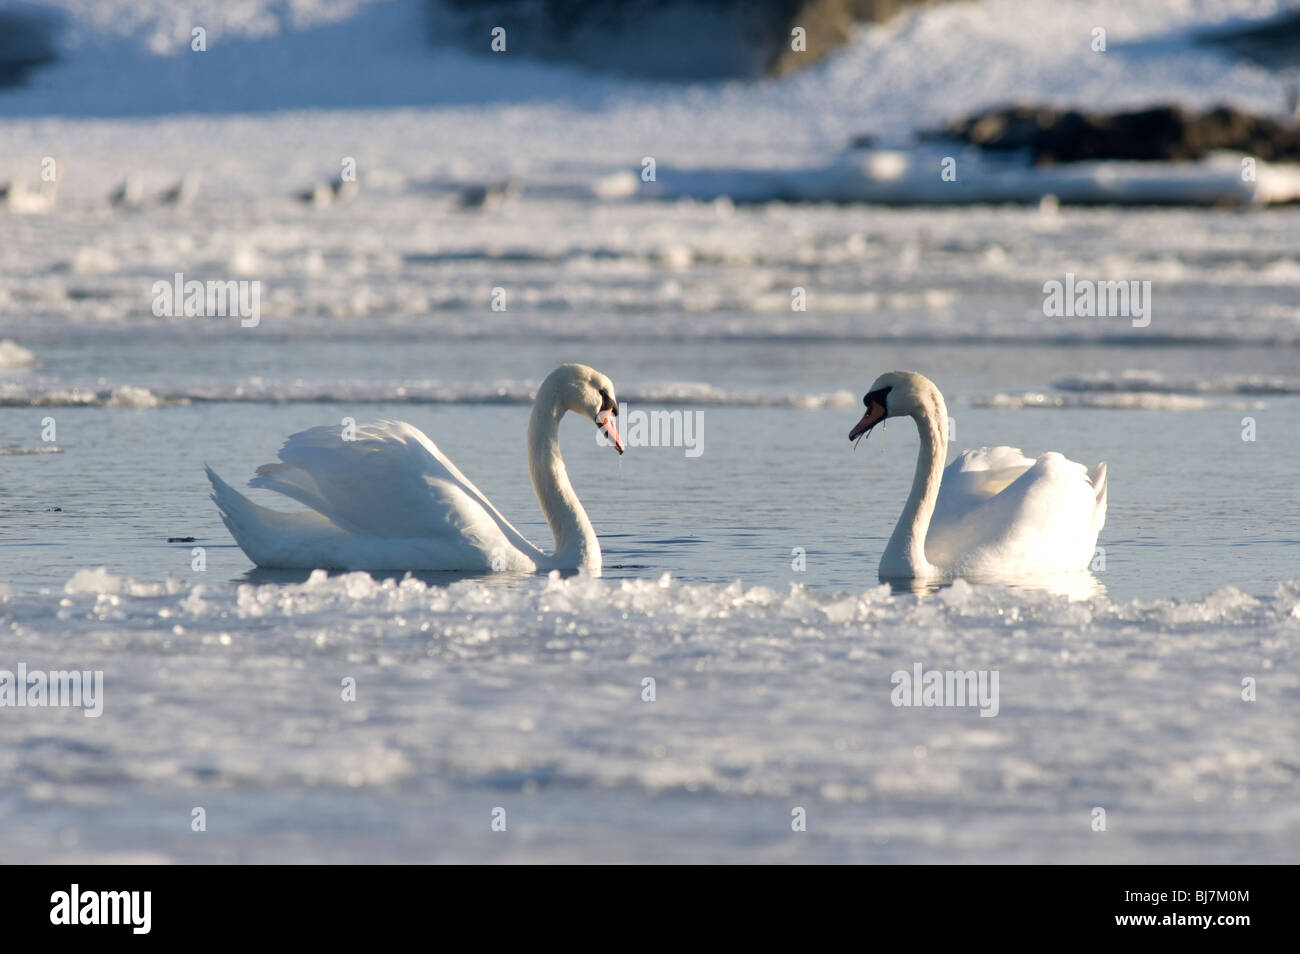 Swans in winter time, Sweden Stock Photo